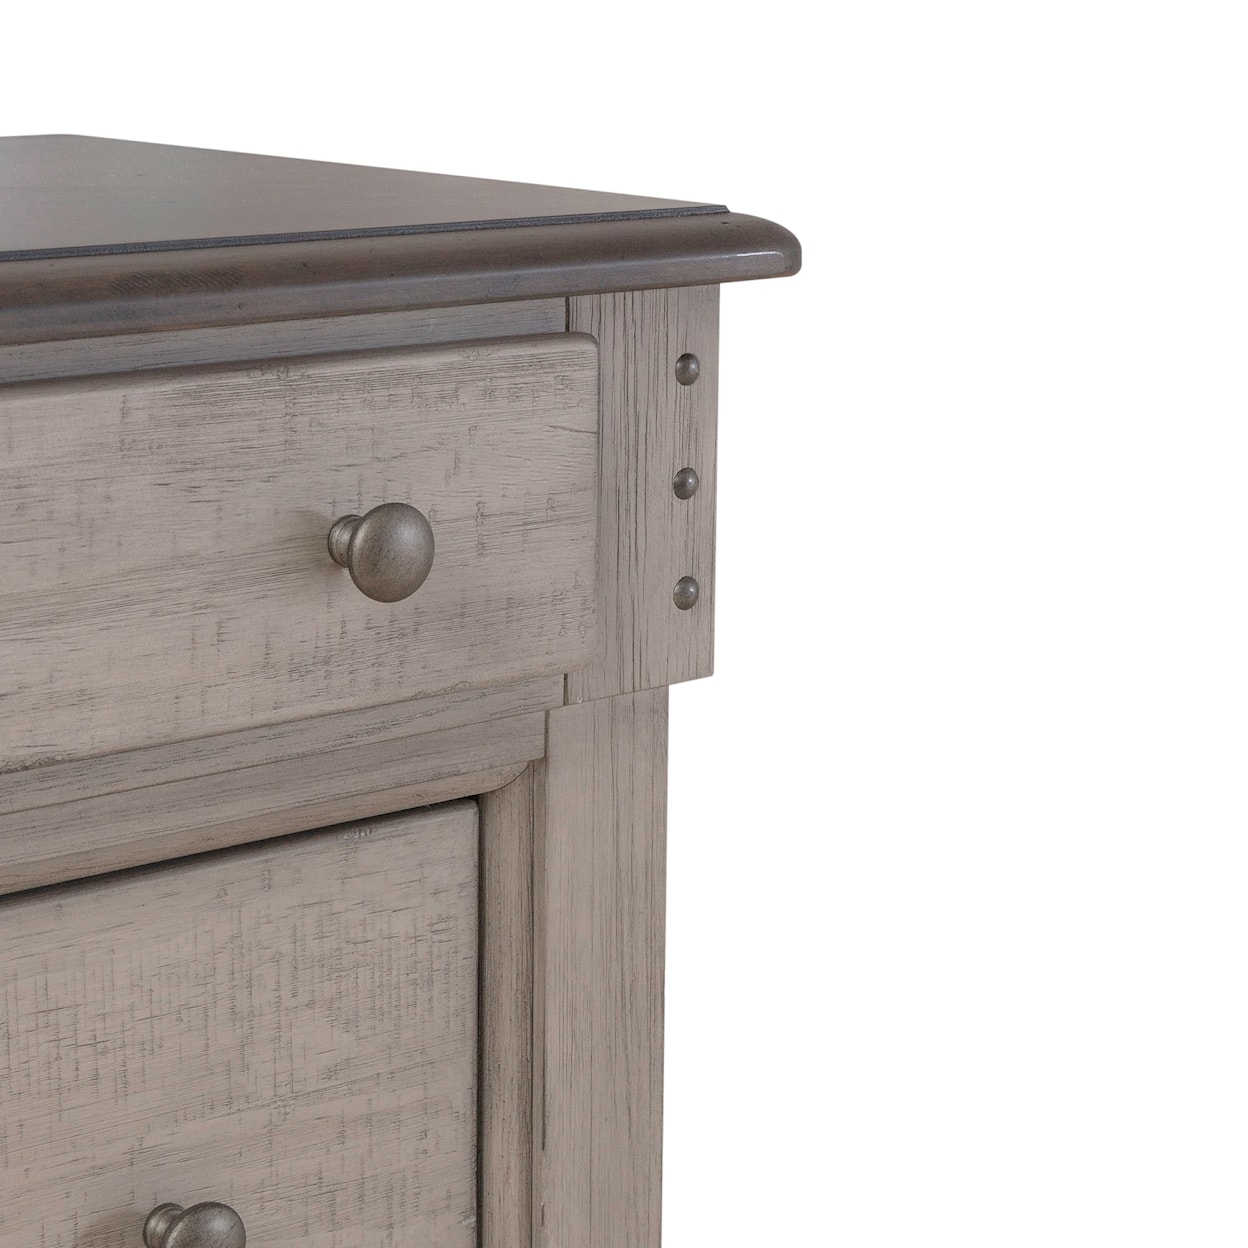 Liberty Furniture Ivy Hollow 5-Drawer Bedroom Chest